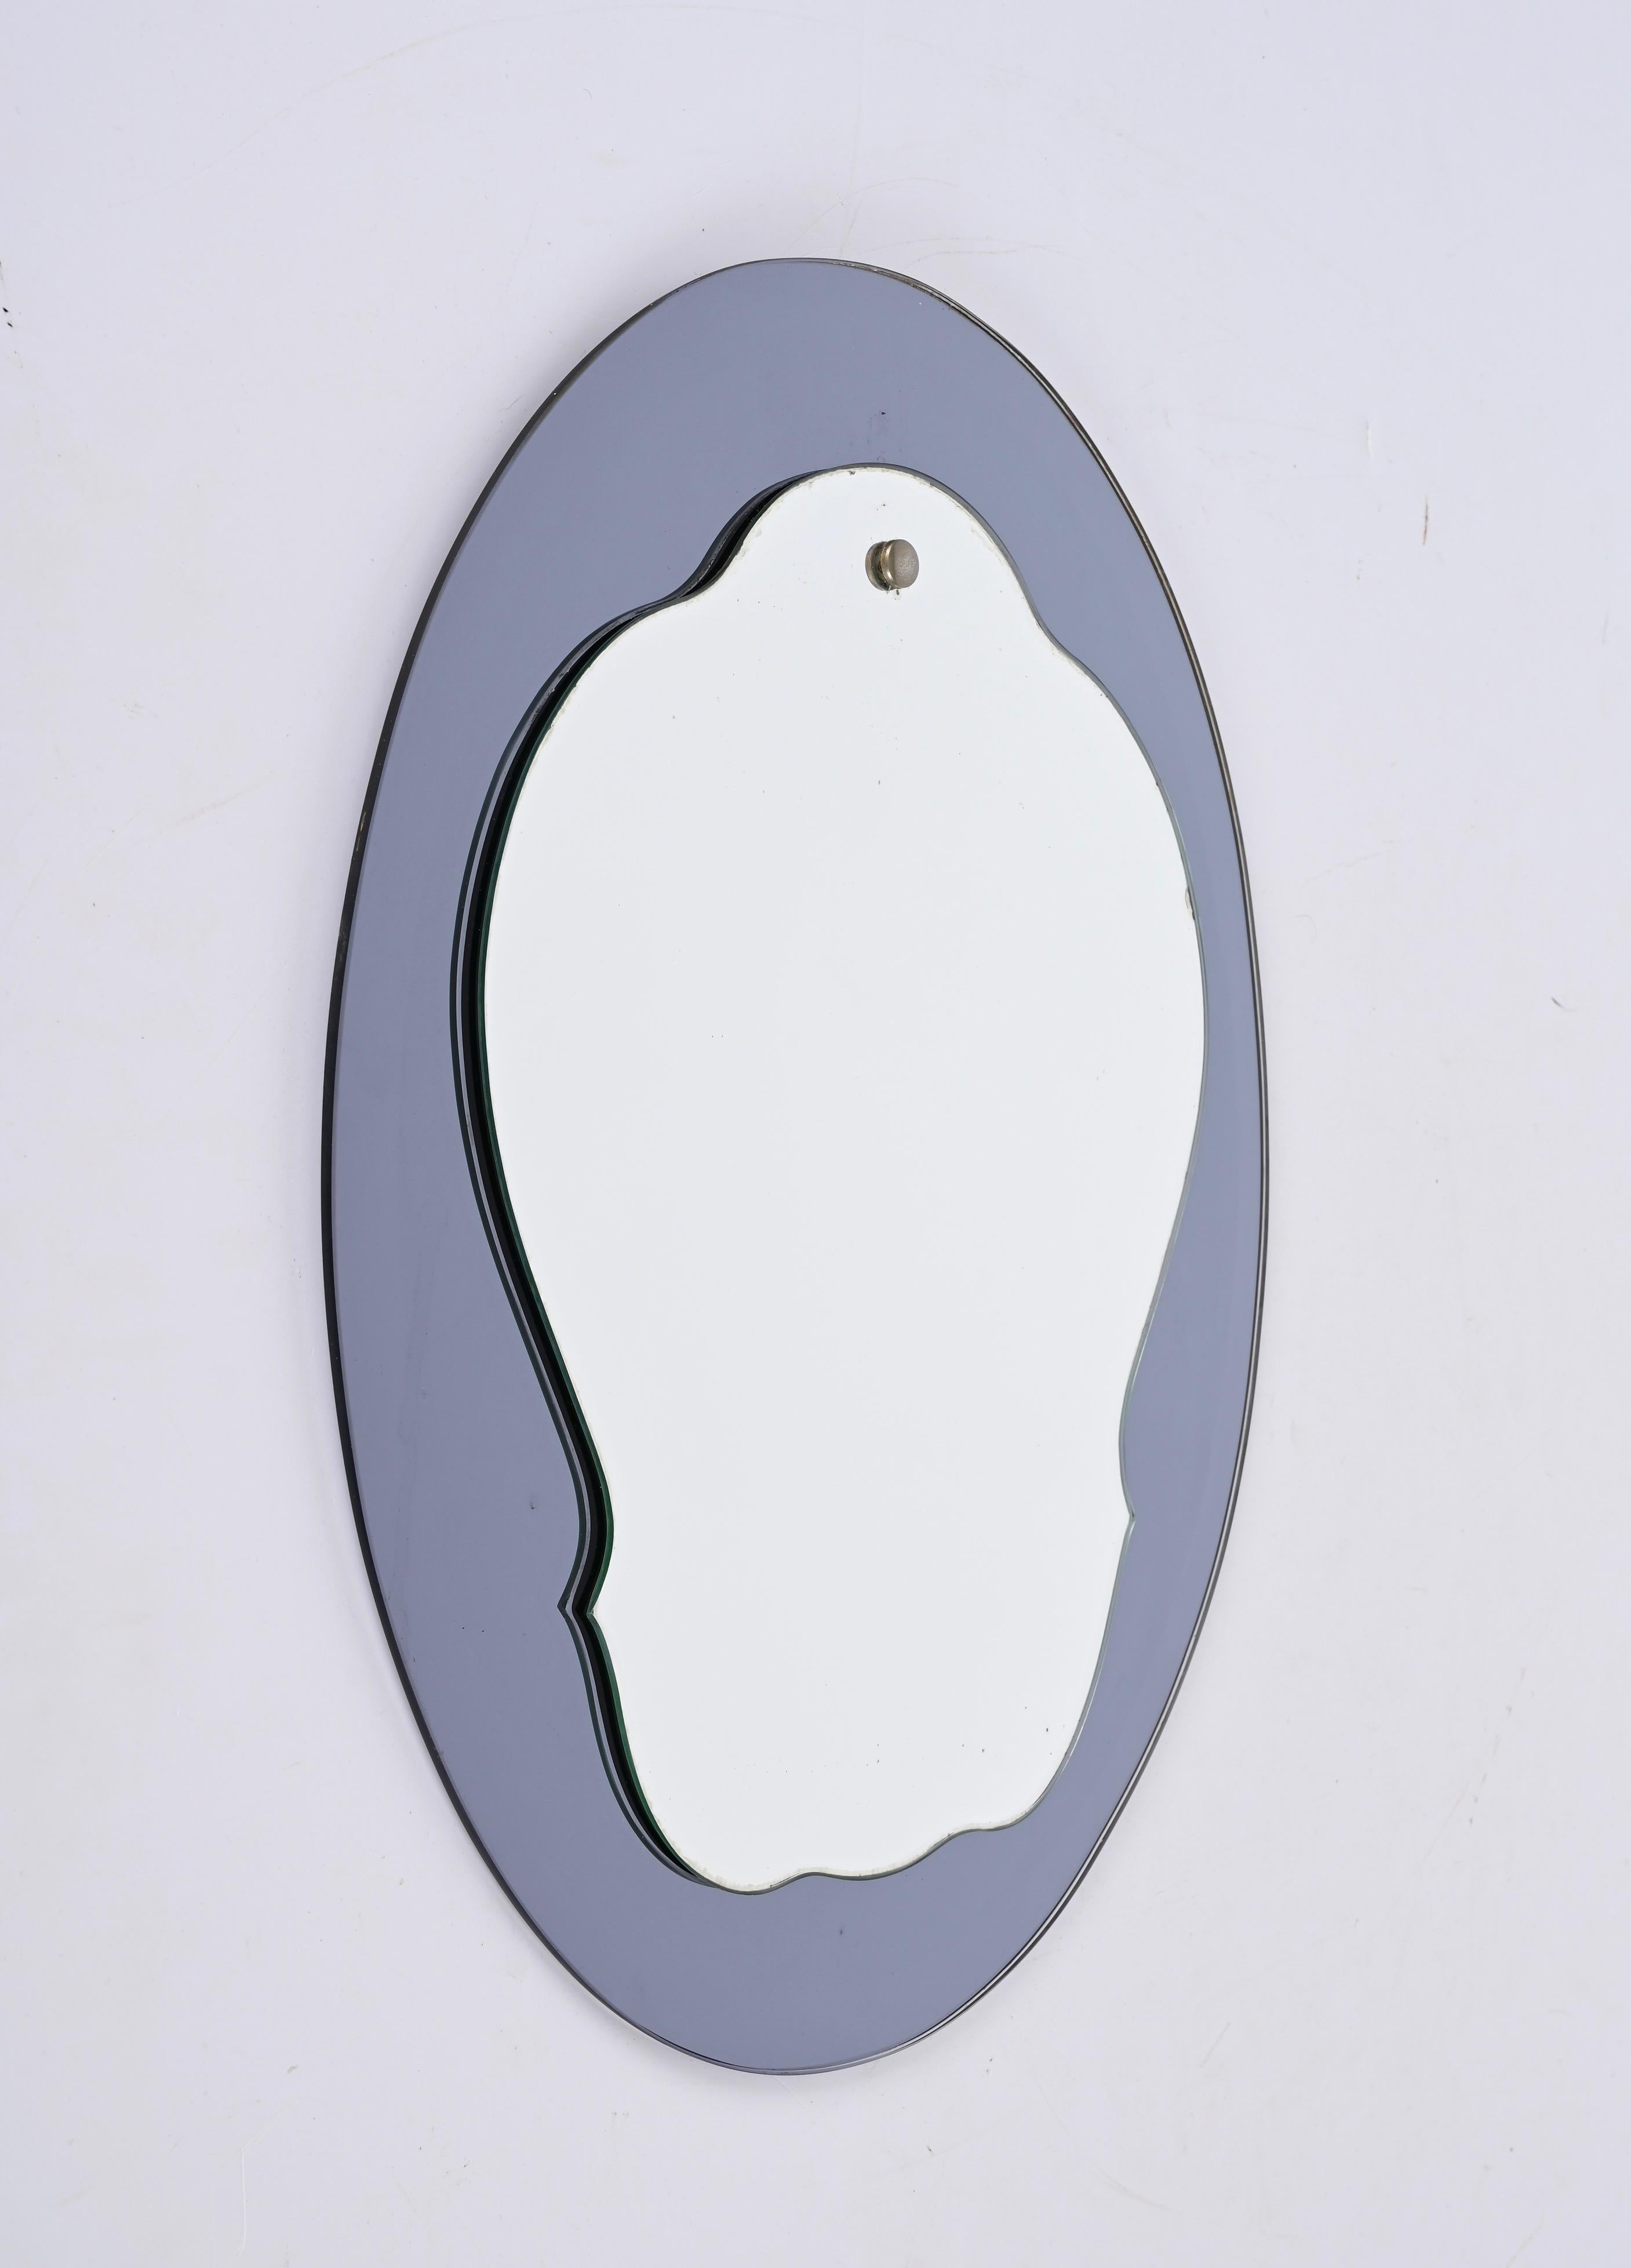 Midcentury Cristal Art Oval Italian Wall Mirror with Blue Glass Frame, 1960s For Sale 4